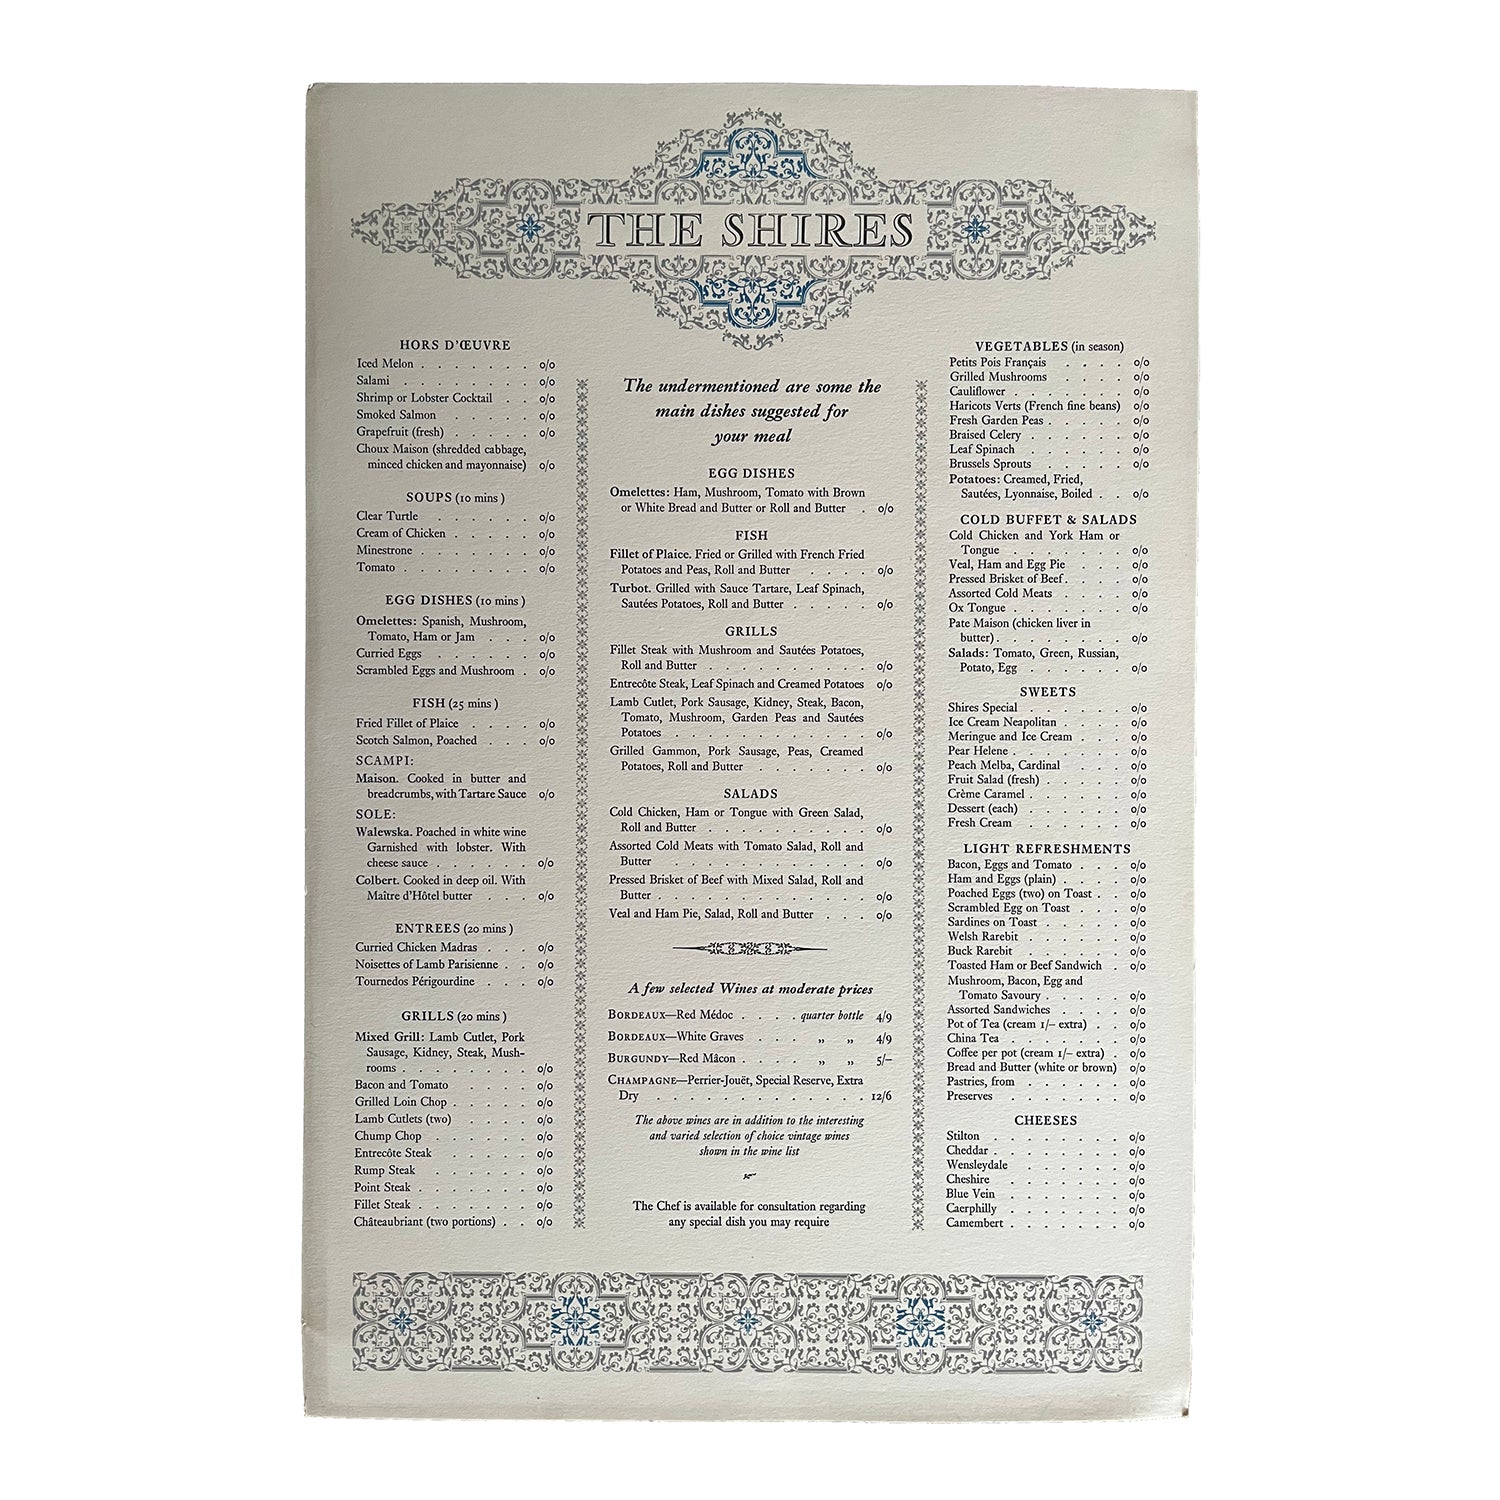 railway hotel menu for the The Shires restaurant, Welcombe Hotel (Stratford Upon Avon), printed by the Curwen Press, c. 1960.